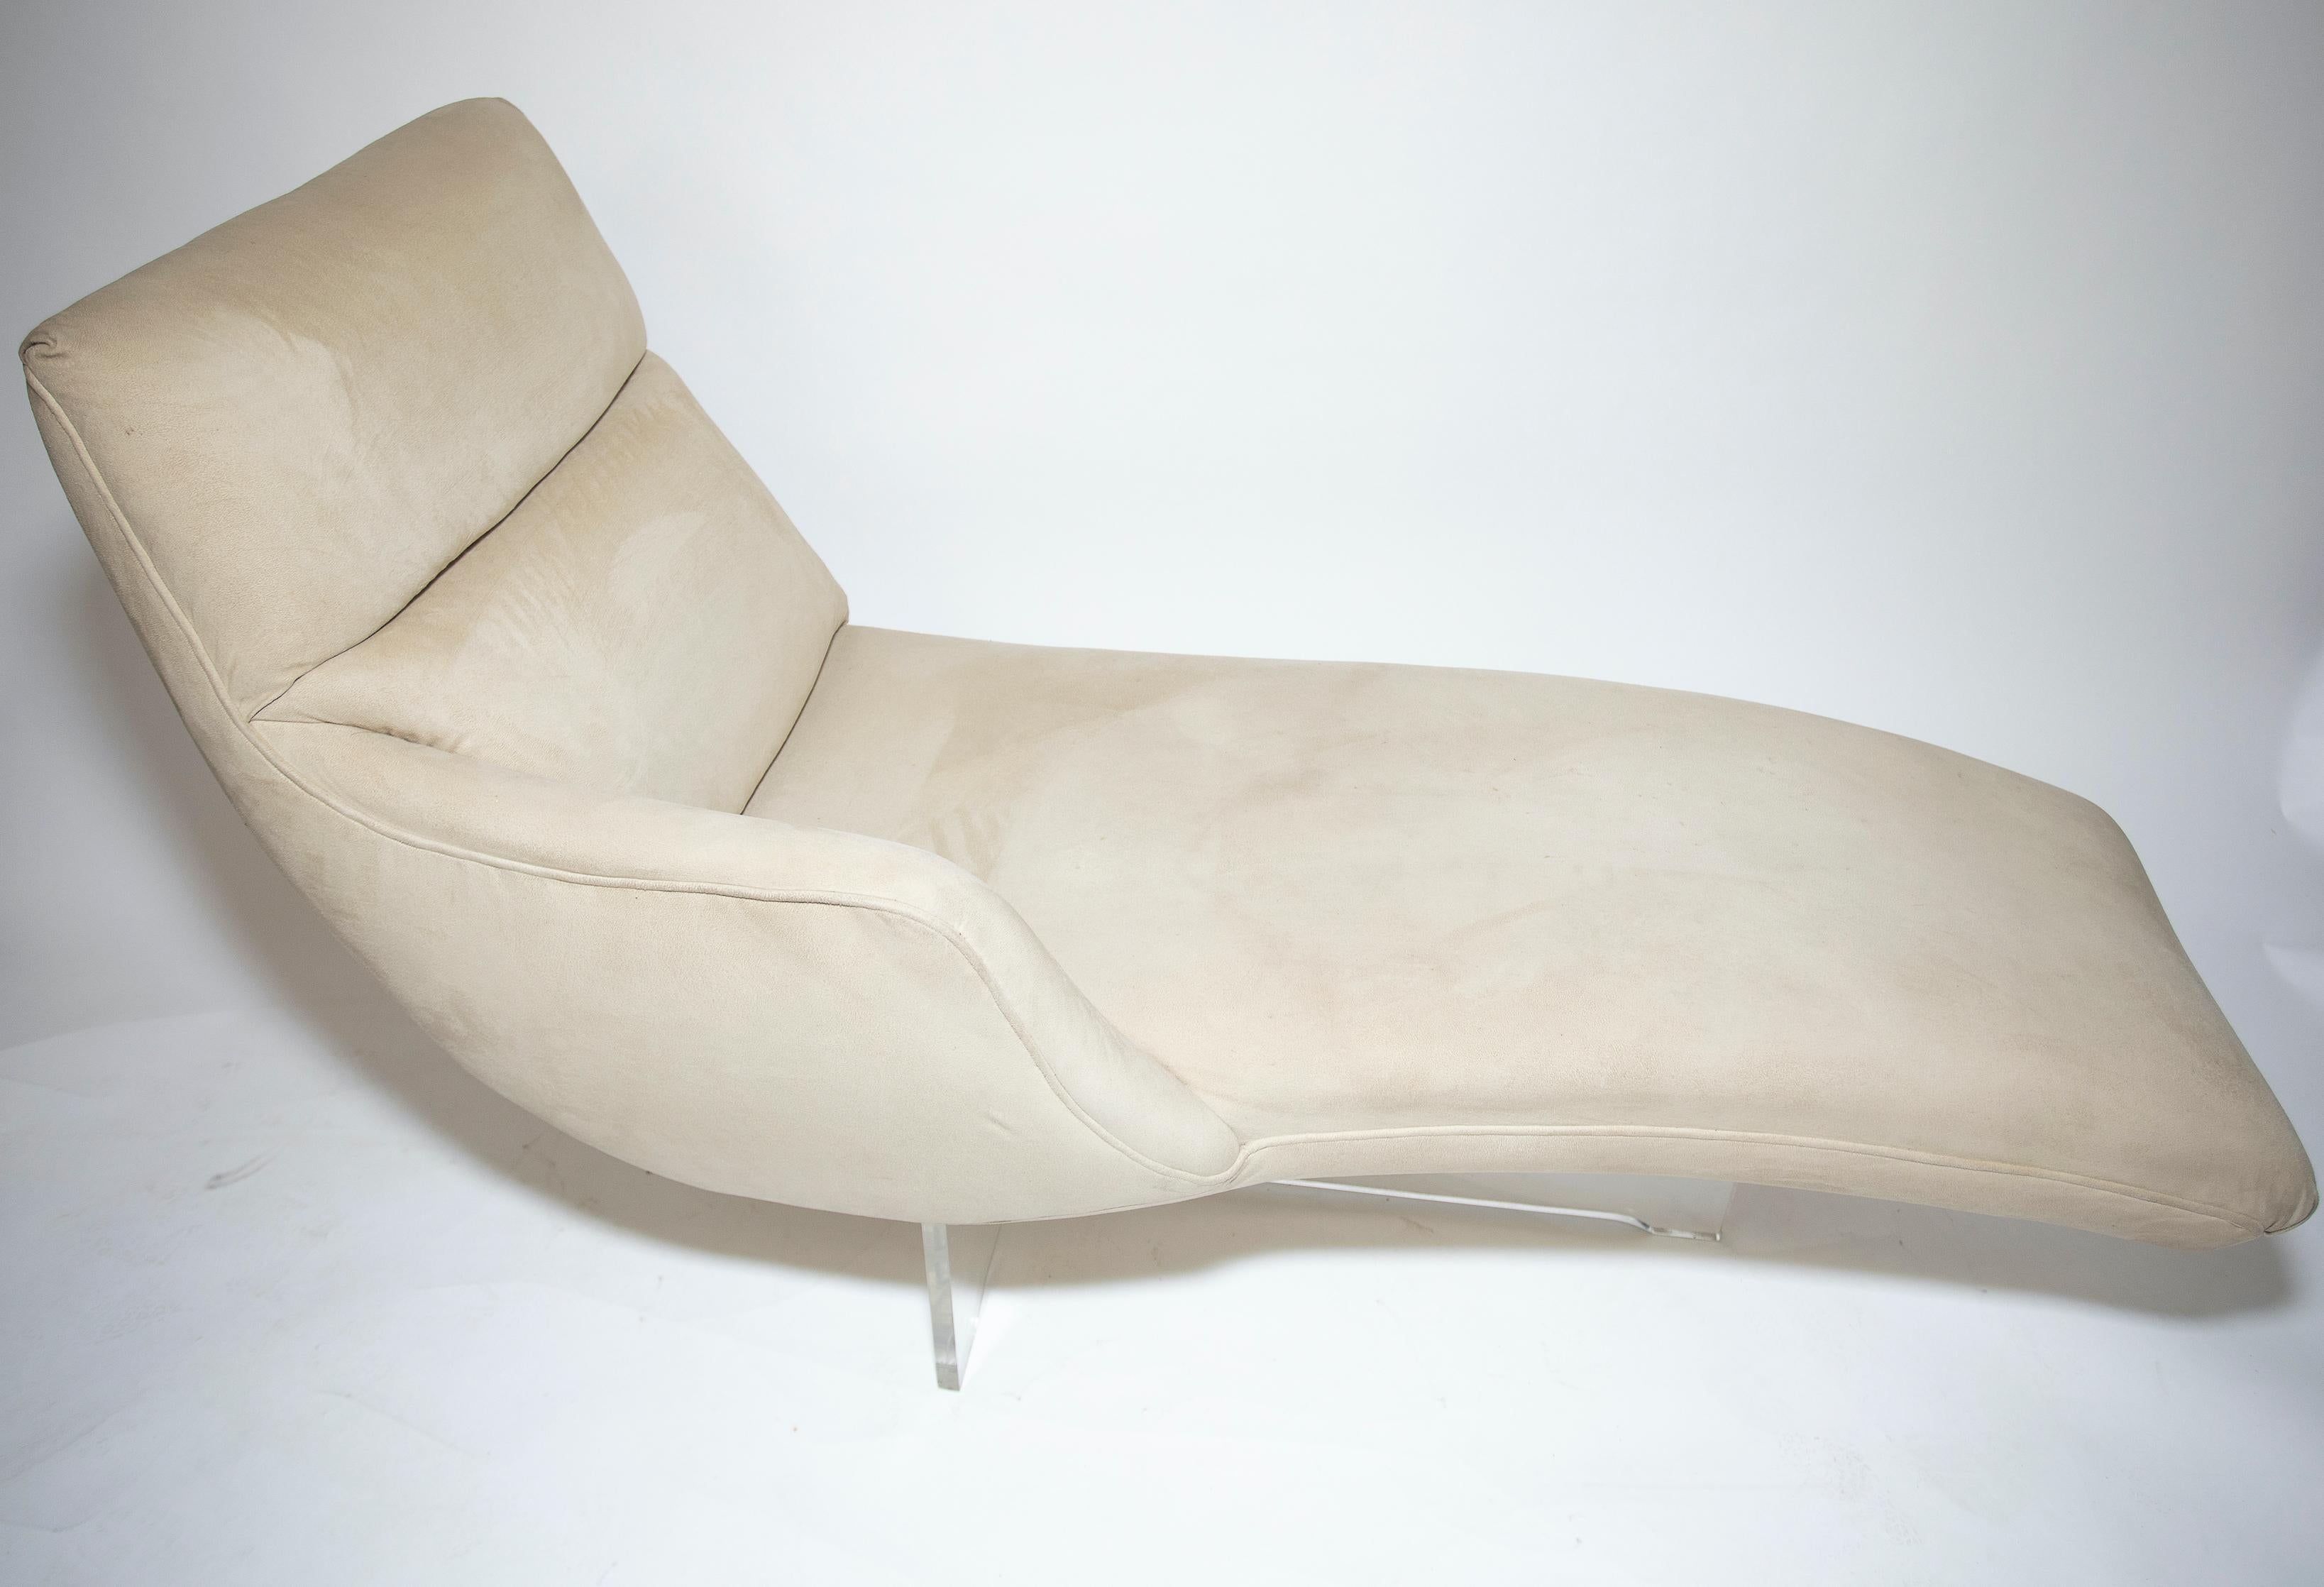 Vladimir Kagan Erica Chaise
An iconic form covered in its original ultra suede upholstery.
  